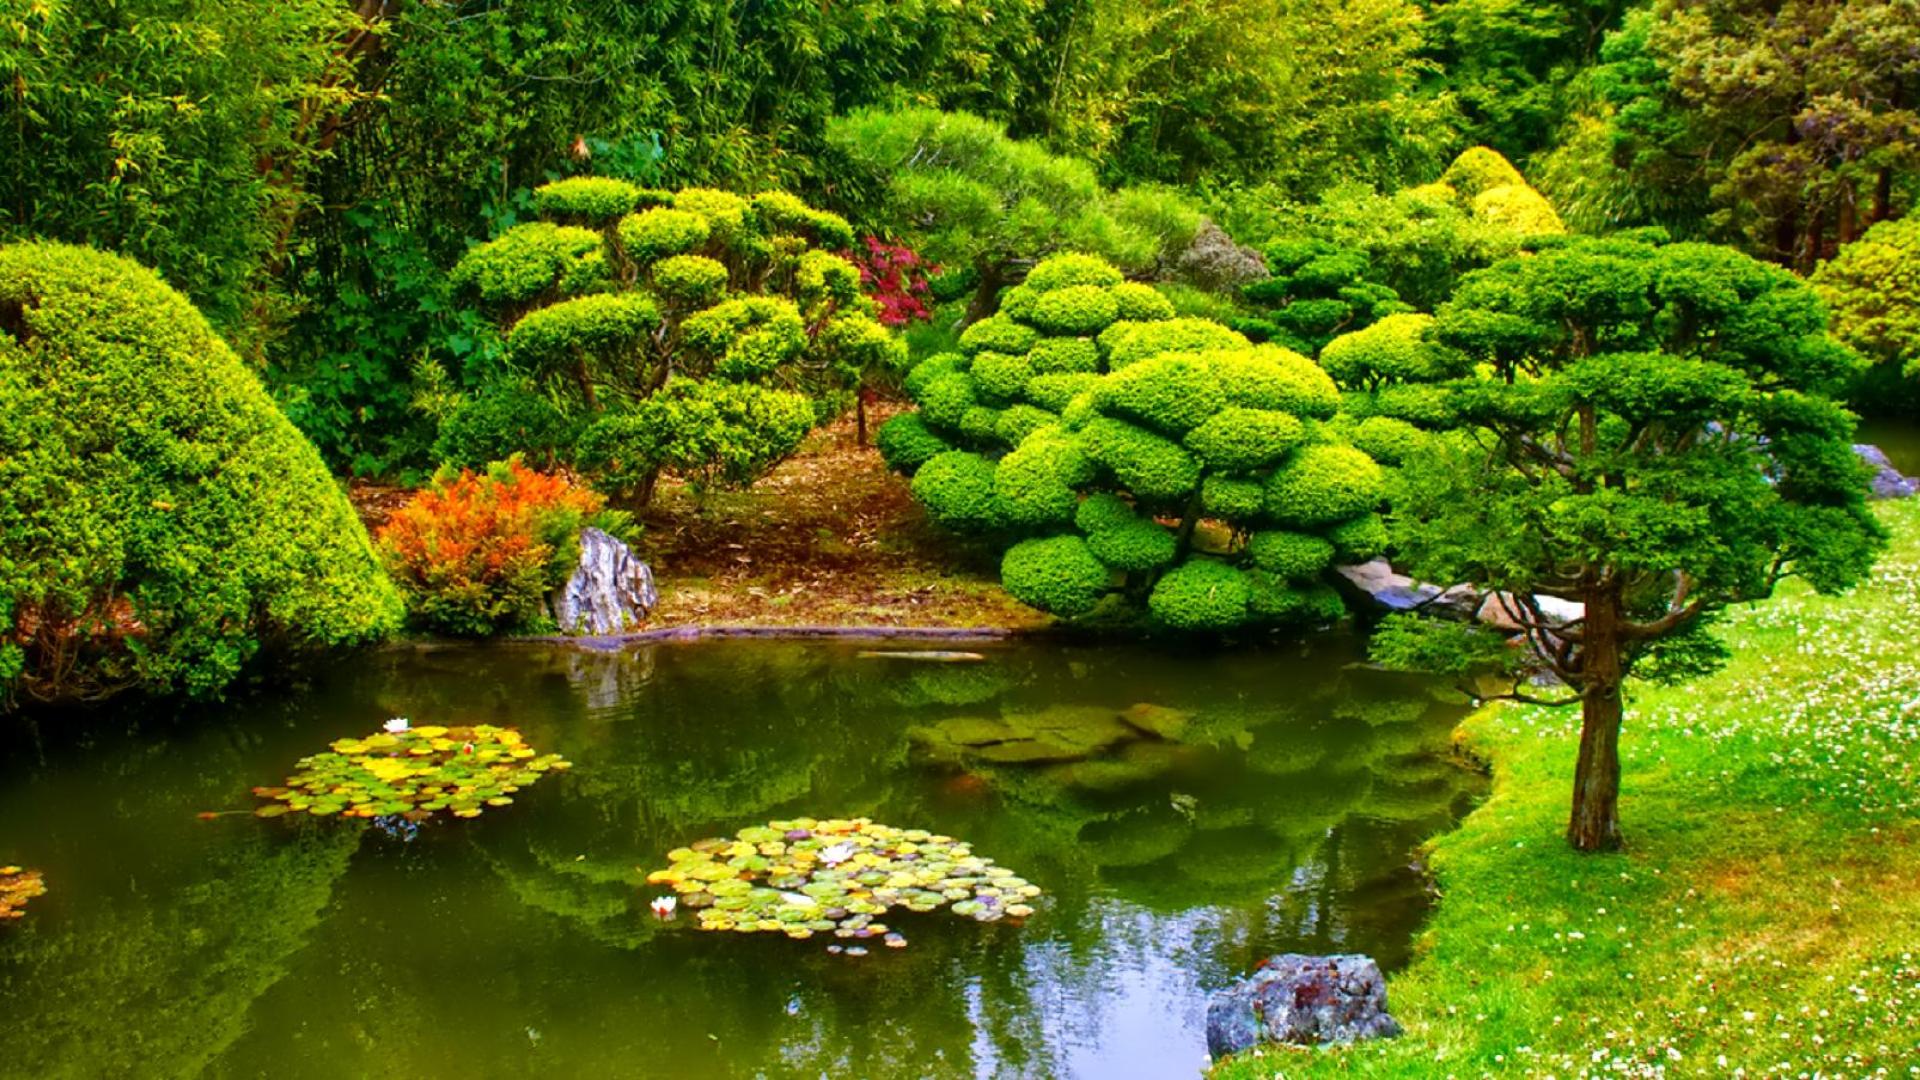 Japan Garden High Quality And Resolution Wallpaper On